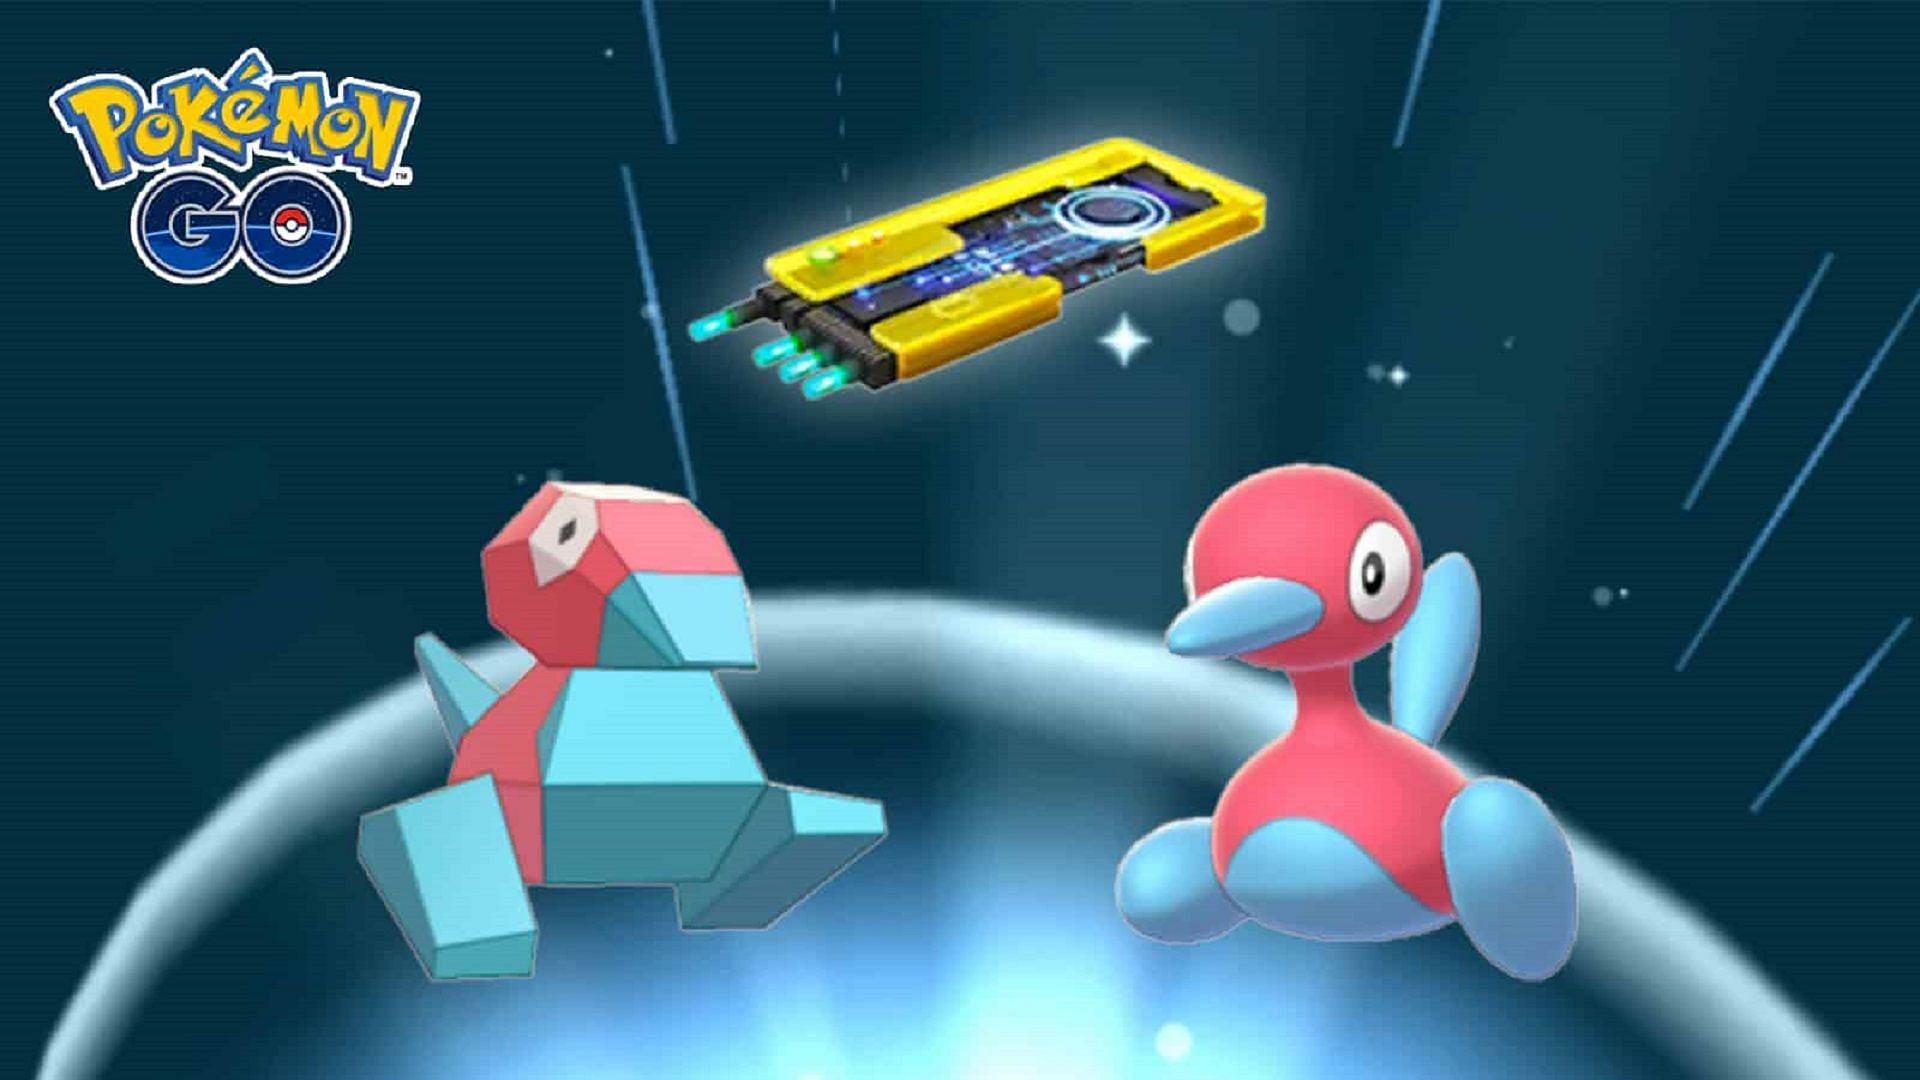 Up-Grades can be used to evolve Porygon into Porygon2 in Pokemon GO (Image via Niantic)